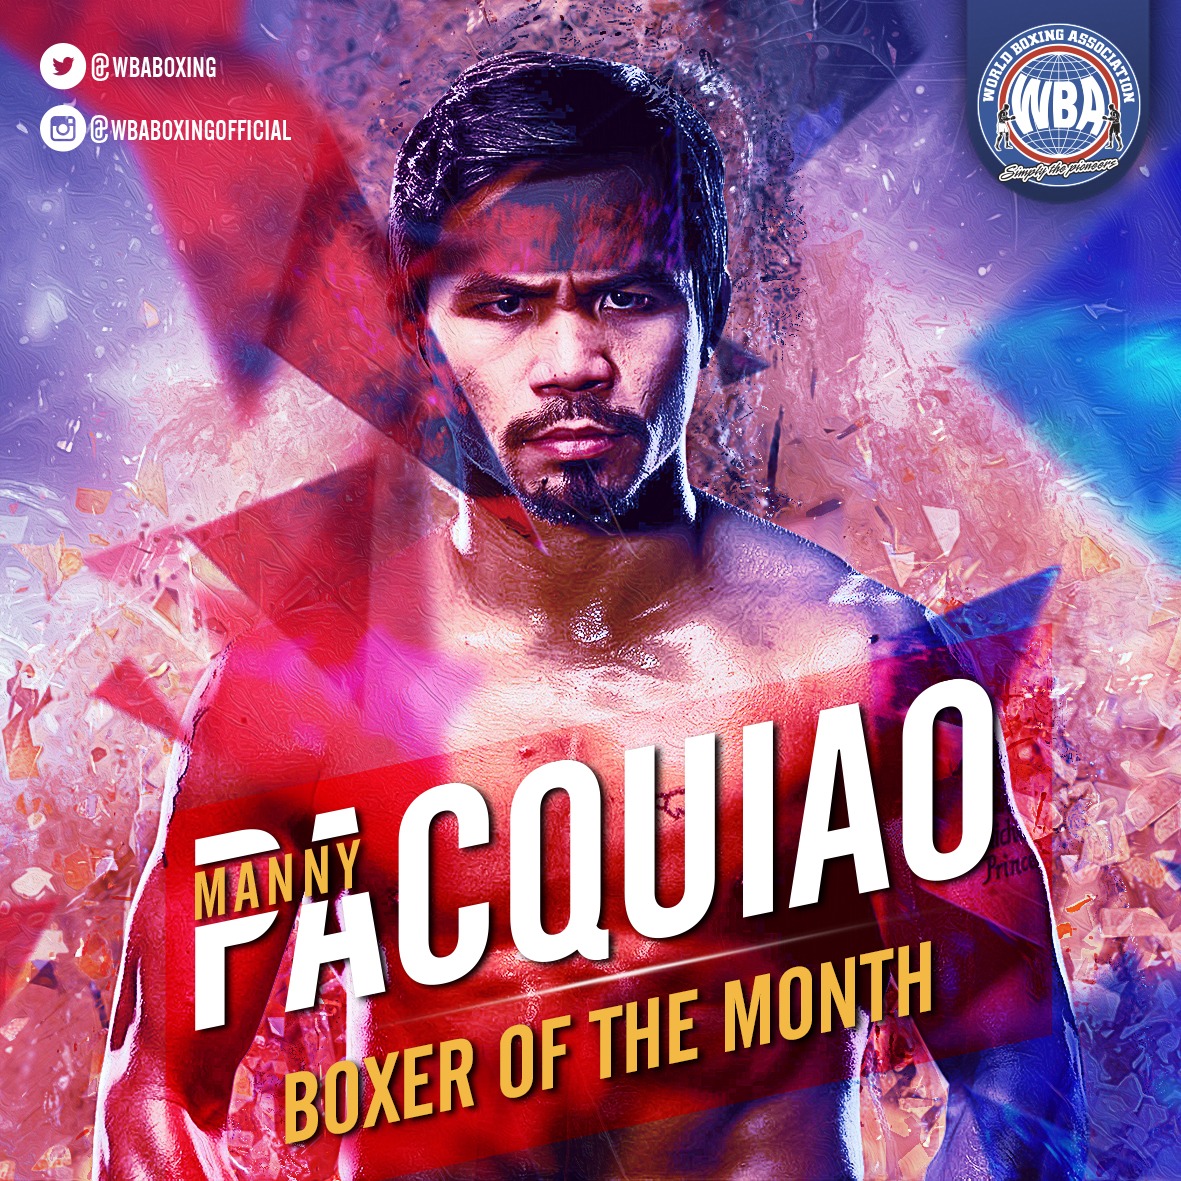 WBA July Rankings and Boxer of the Month